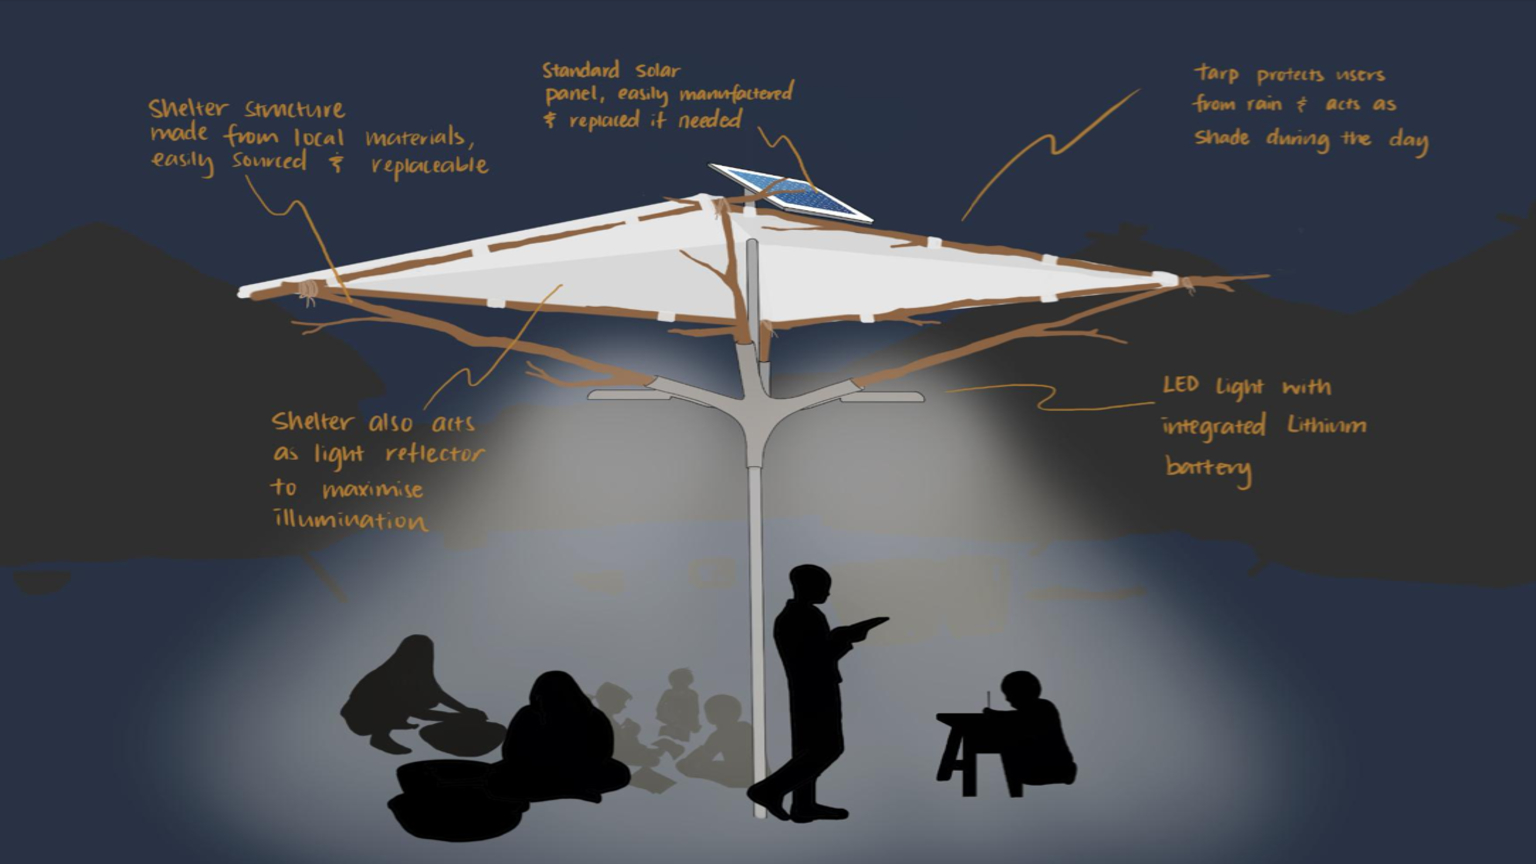 The shelter built on TreeLight allows the product to be used during the day as shade, but also during rainy days.